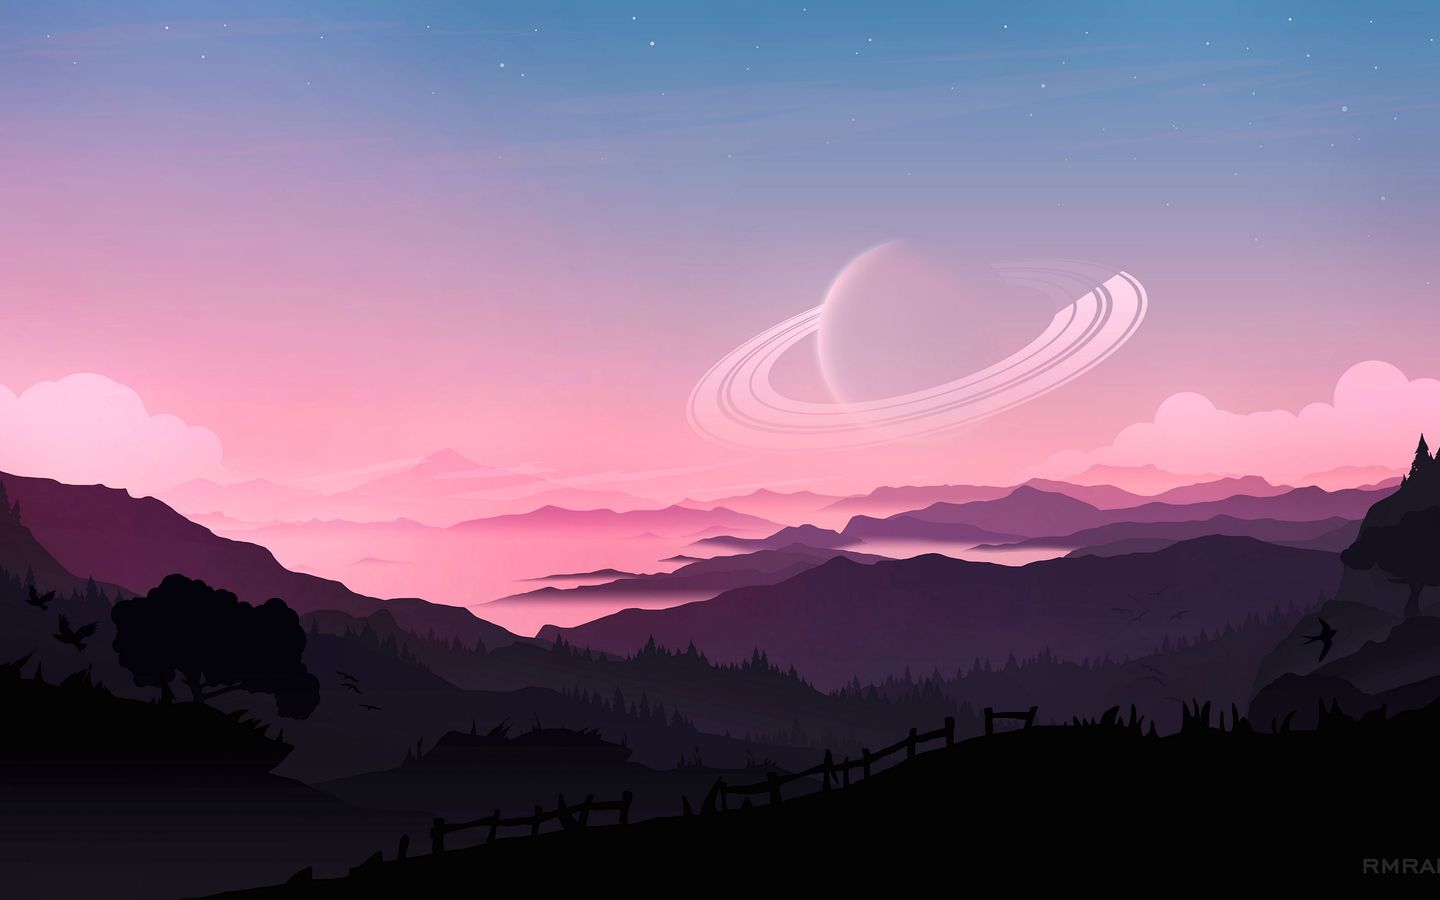 1920x1200 wallpaper of a planet in the sky over a mountain range - 1440x900